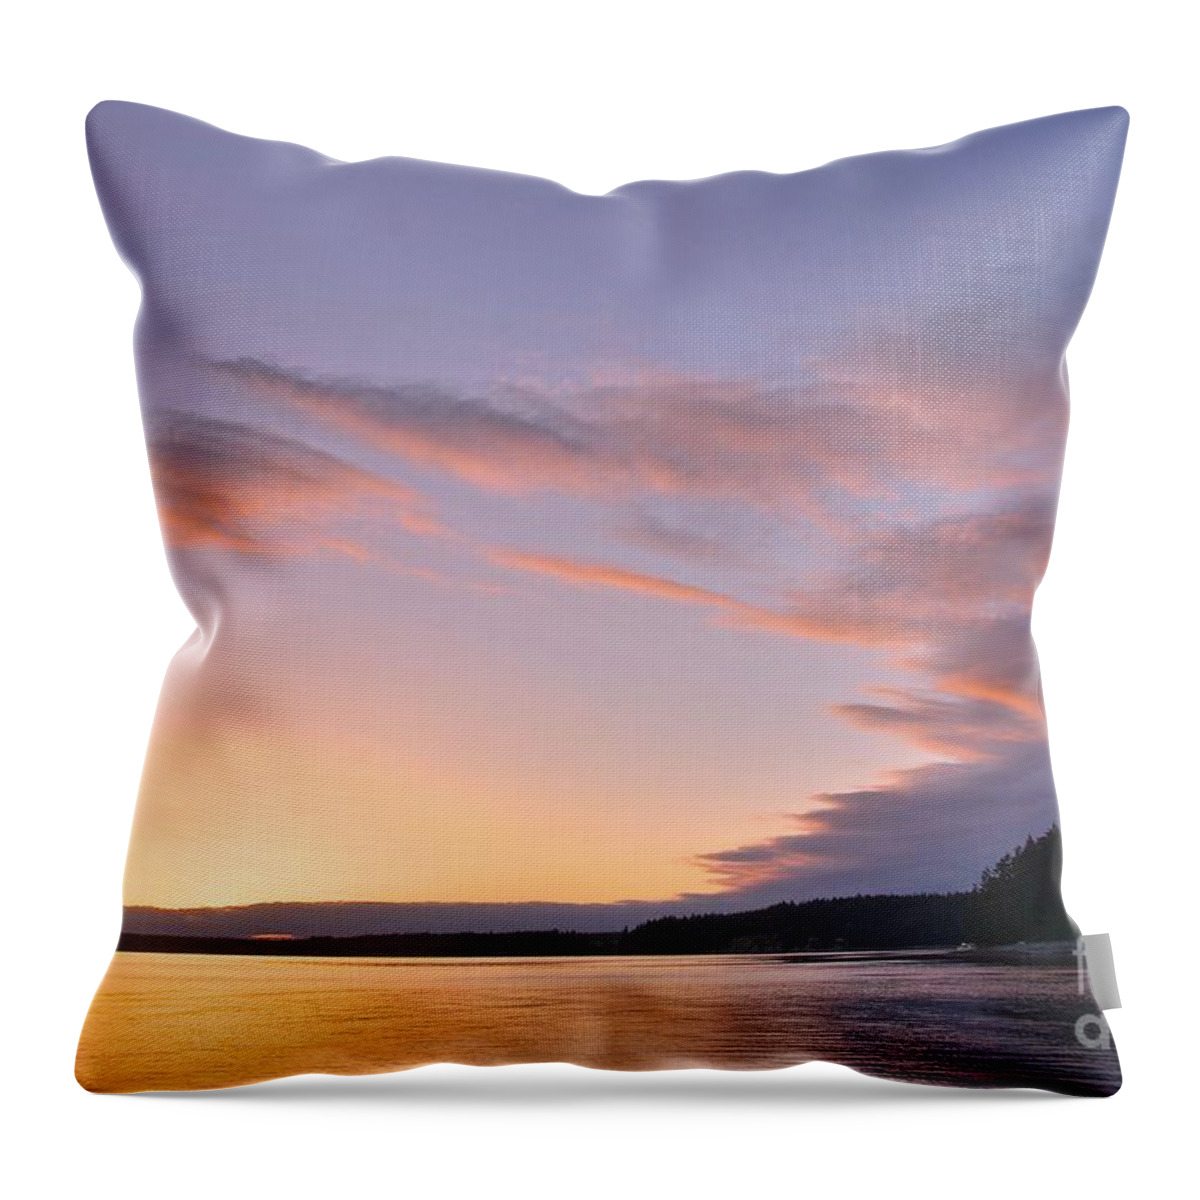 Photography Throw Pillow featuring the photograph On Puget Sound - 2 by Sean Griffin